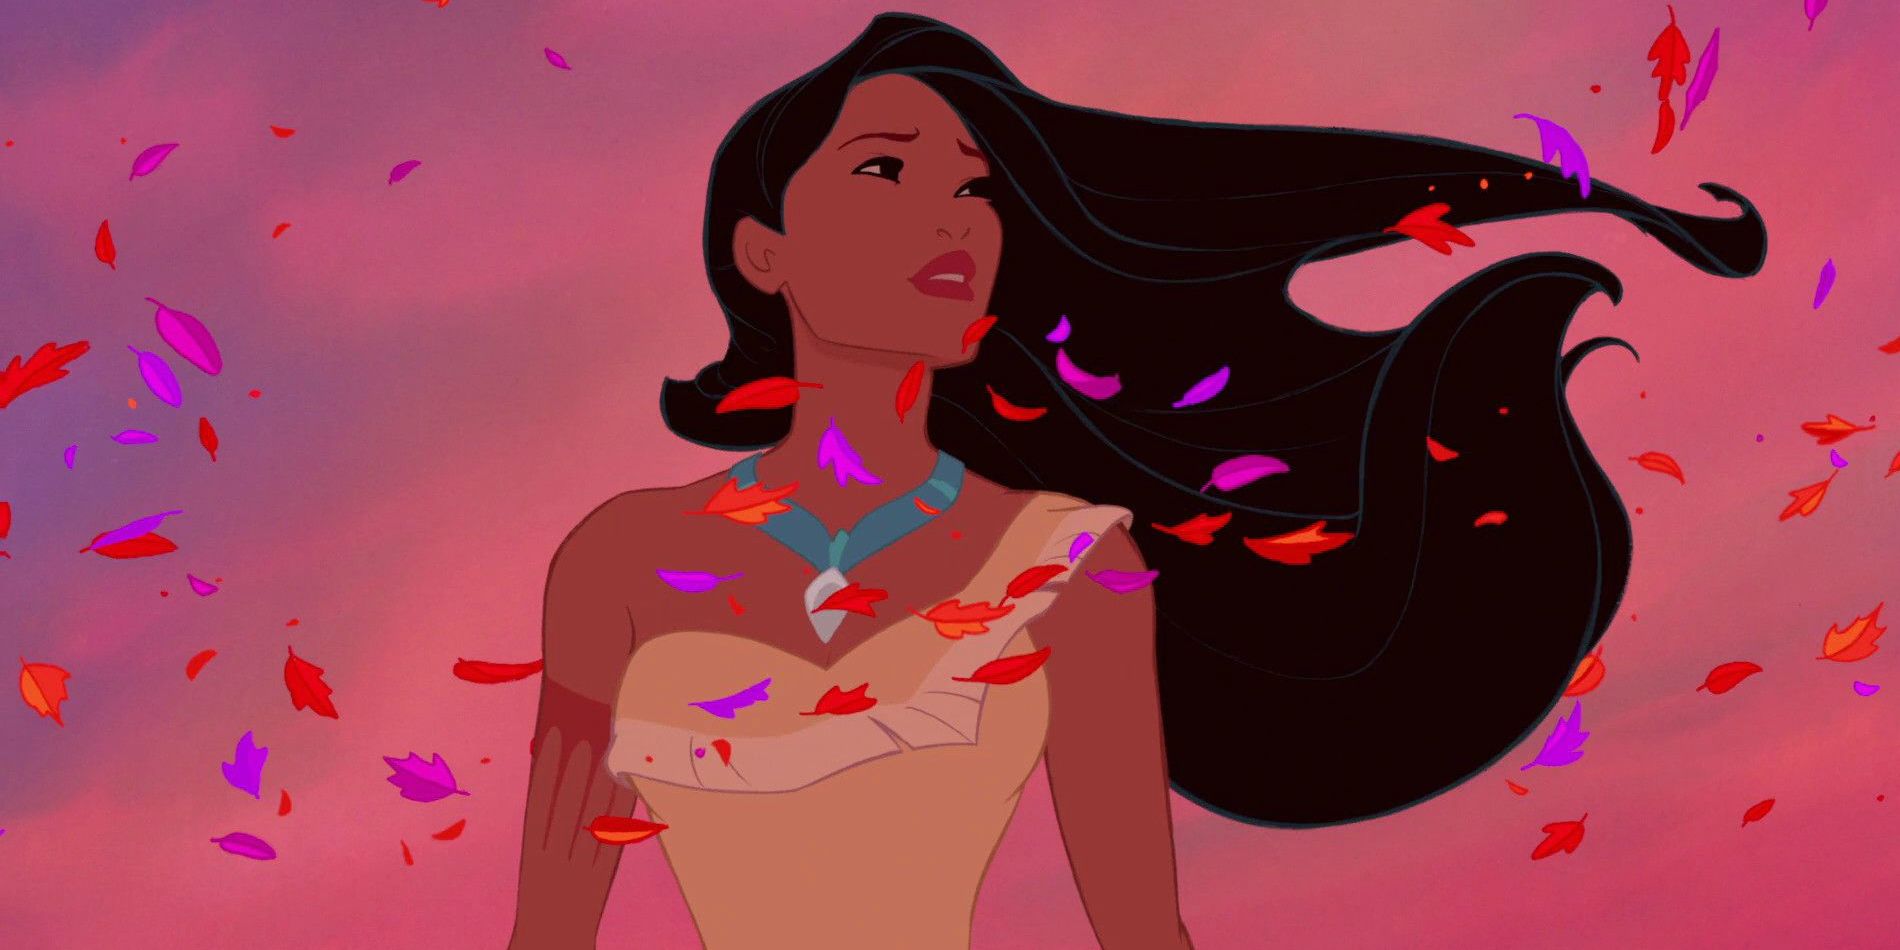 Pocahontas stands in the middle of red and purple leaves